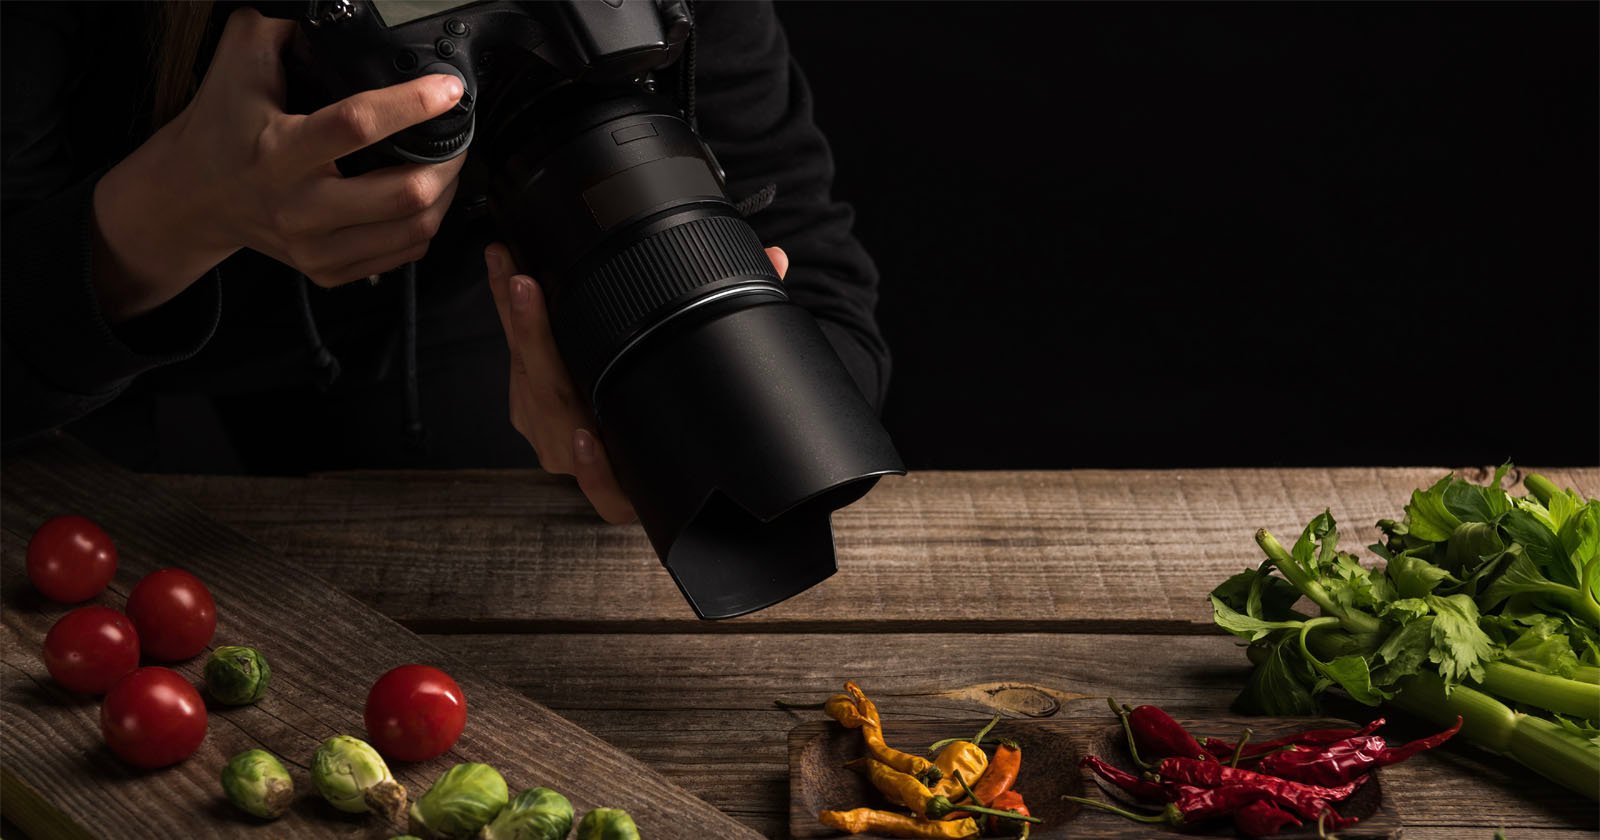 Study Shows That AI Images of Food Look Tastier Than Real Food Photos